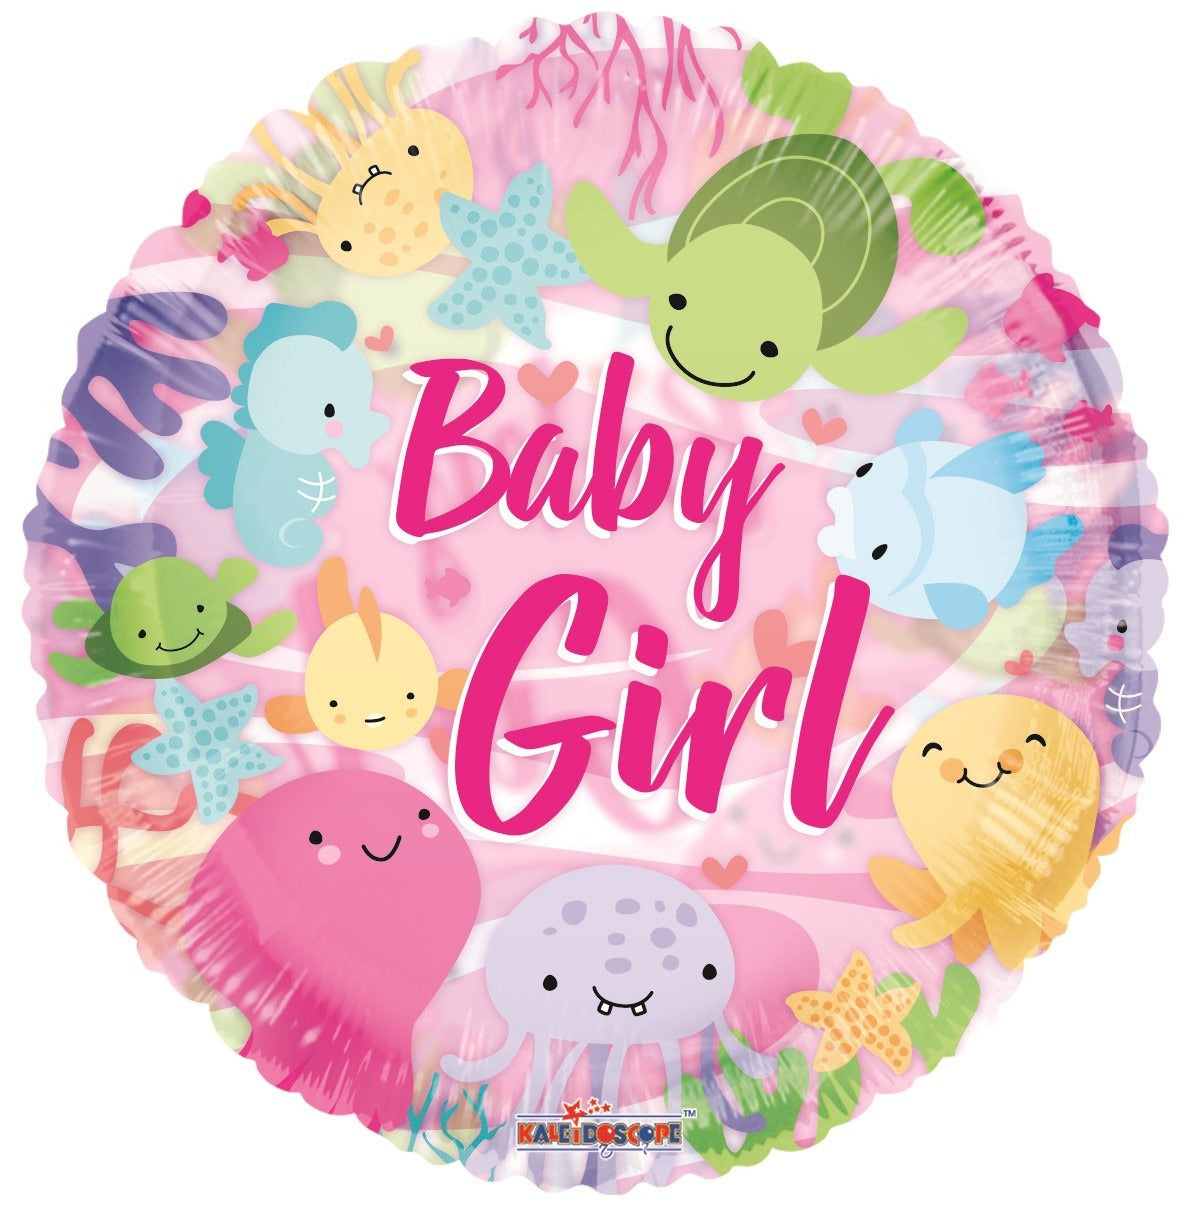 View Baby Girl Under the Sea Balloon information